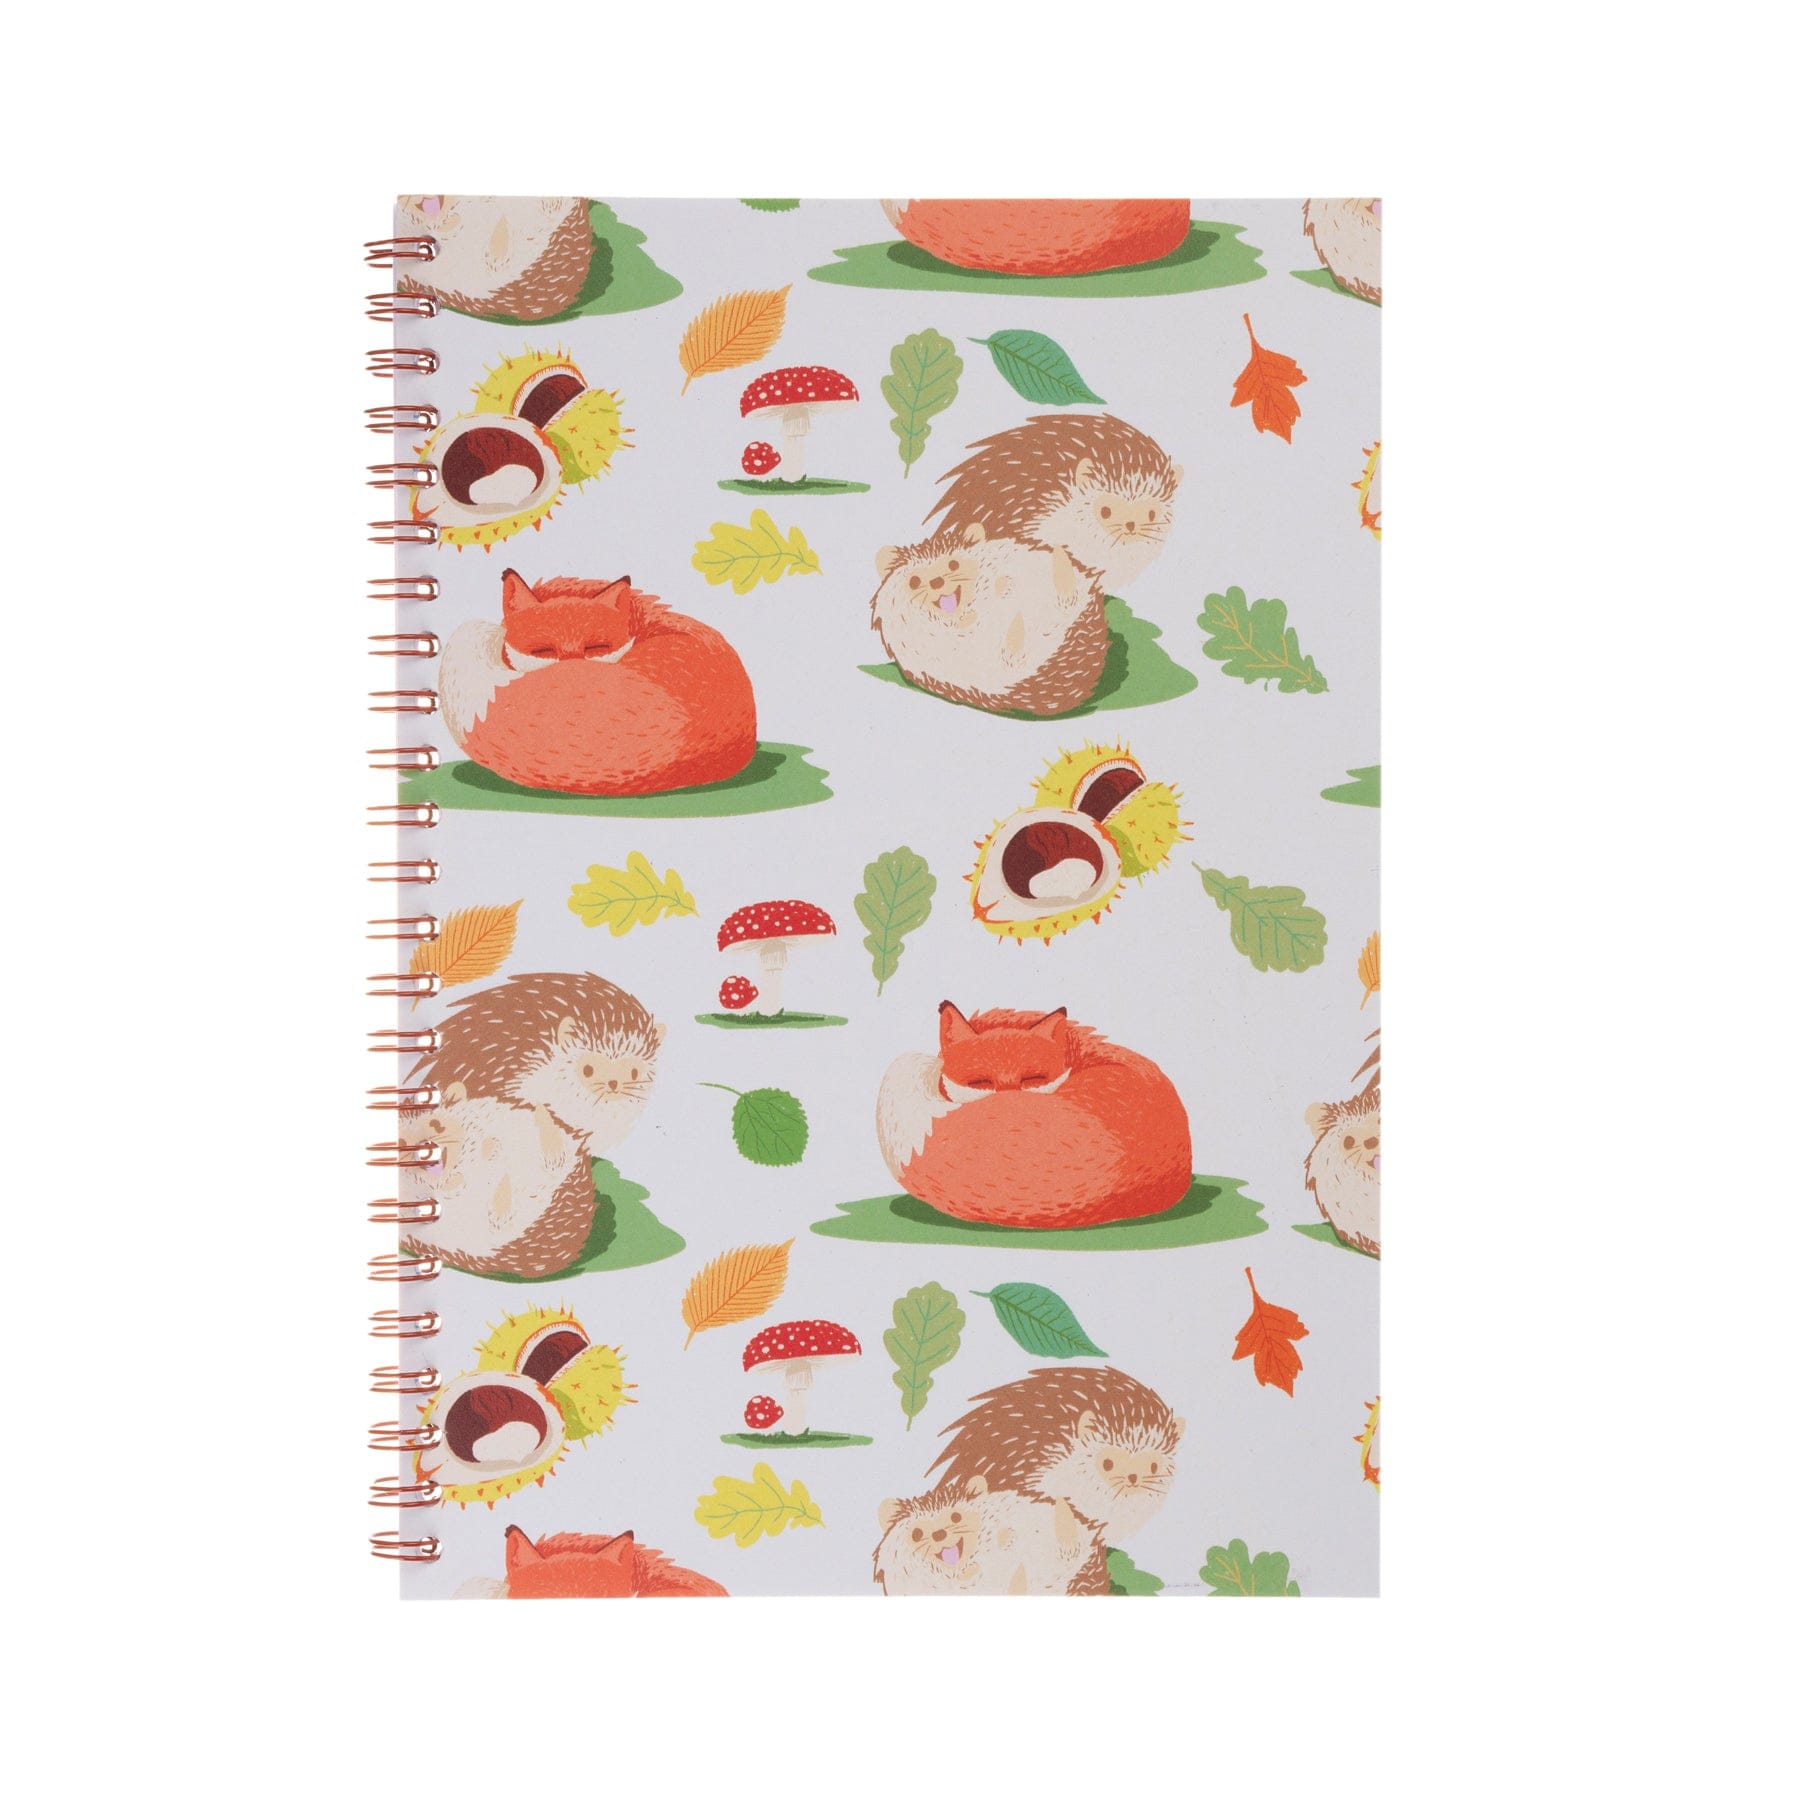 Spiral-bound notebook with a patterned cover featuring illustrations of hedgehogs, autumn leaves, mushrooms, and acorns.